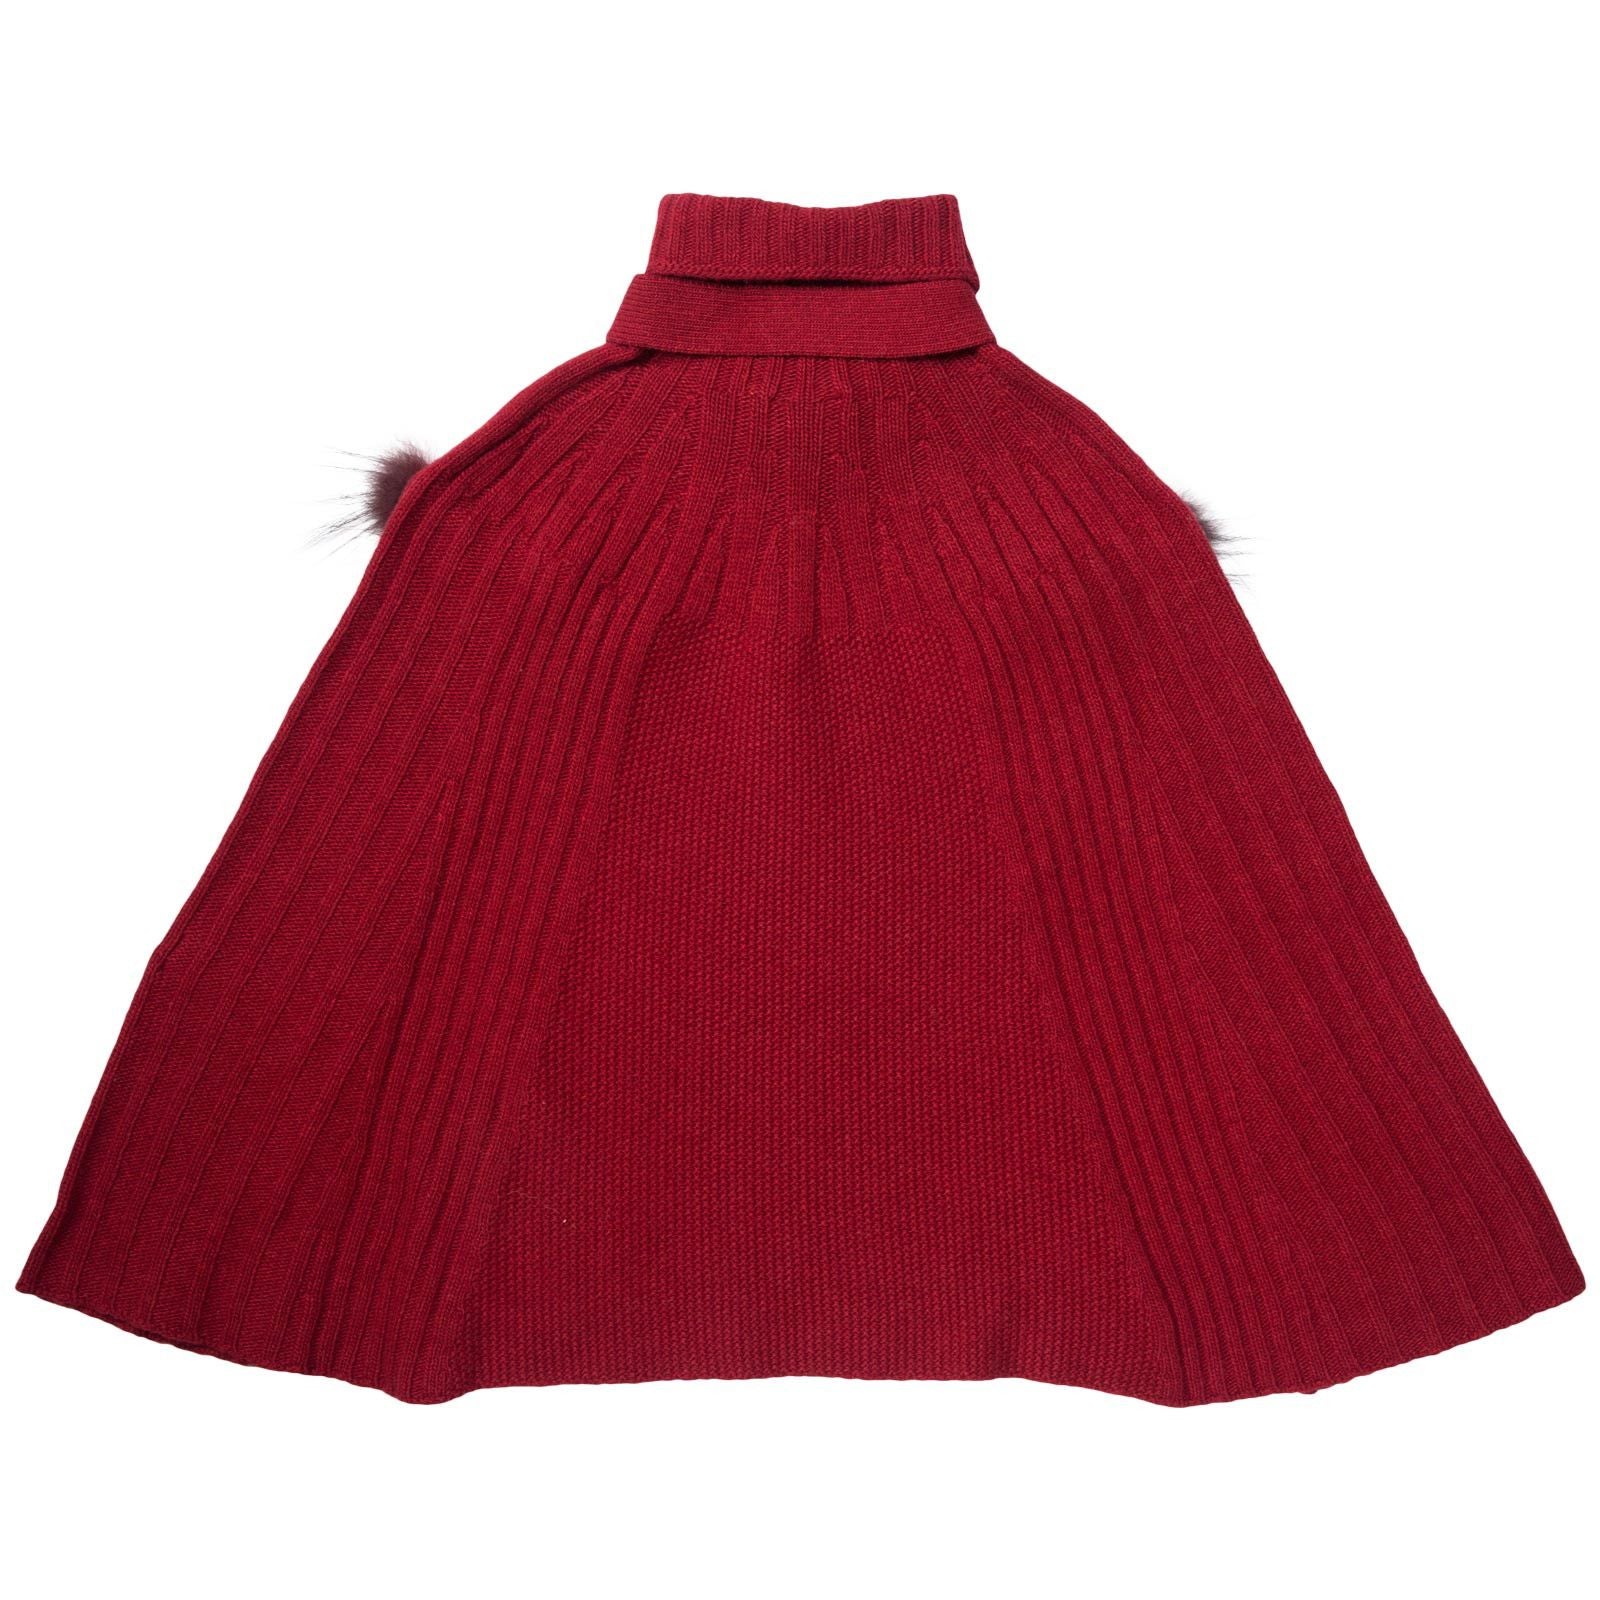 Girls Red Knitted Poncho With Fur Trims - CÉMAROSE | Children's Fashion Store - 2